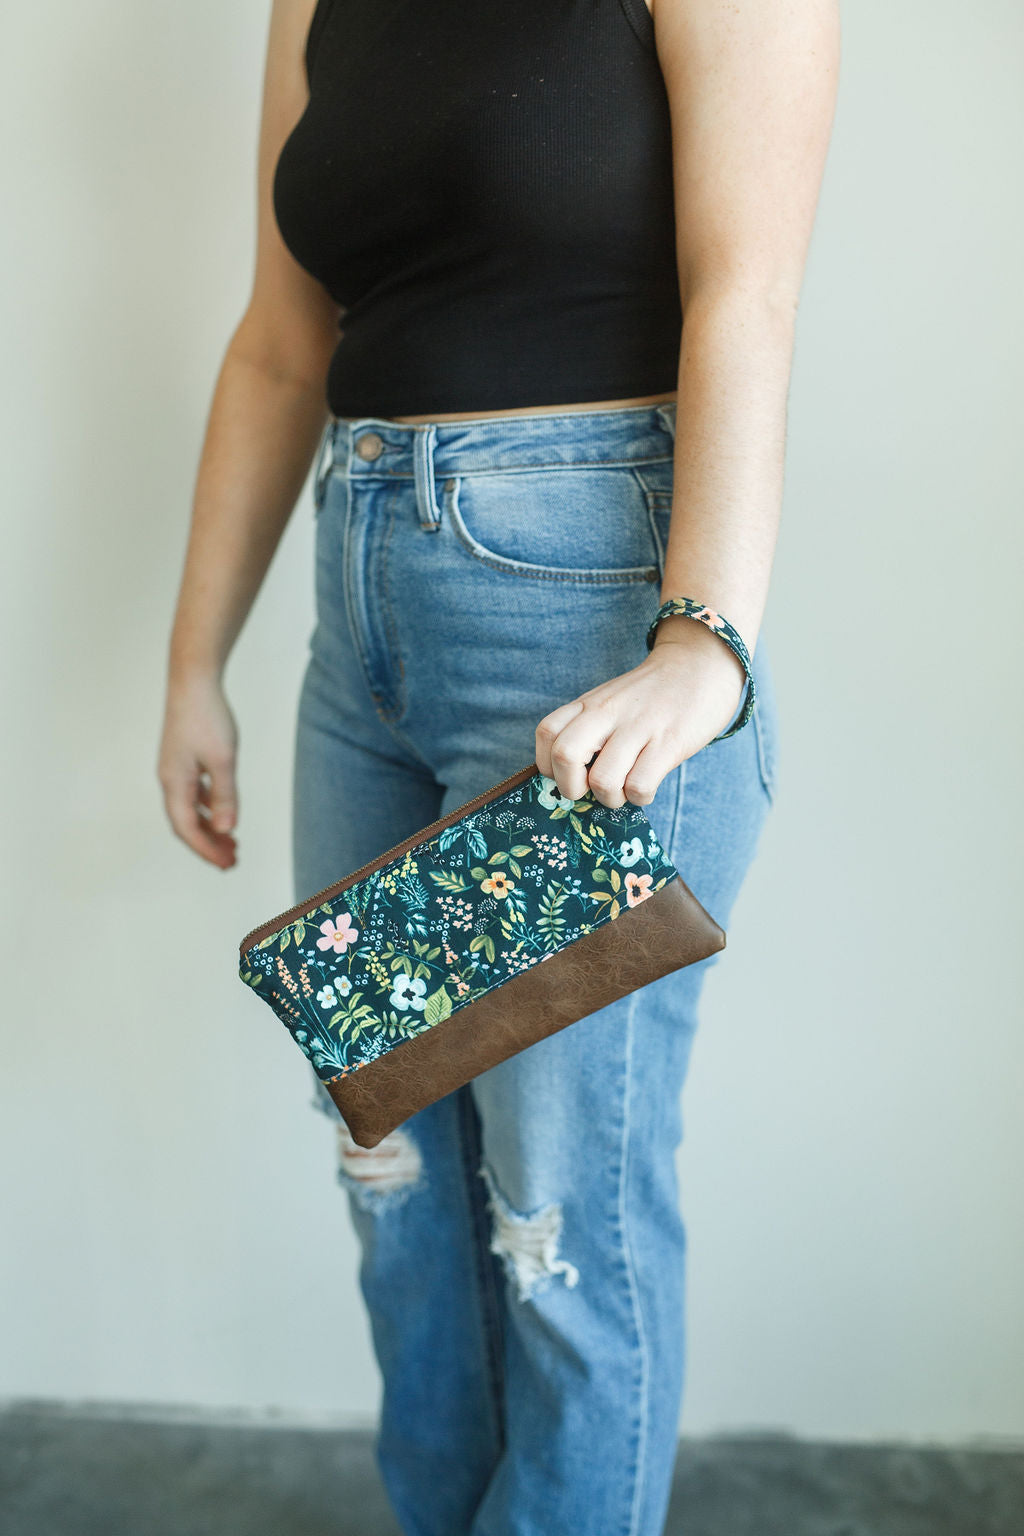 Blue floral wristlet with pink flowers and brown vinyl along the bottom. wristlet has matching wrist strap and antique brass zipper